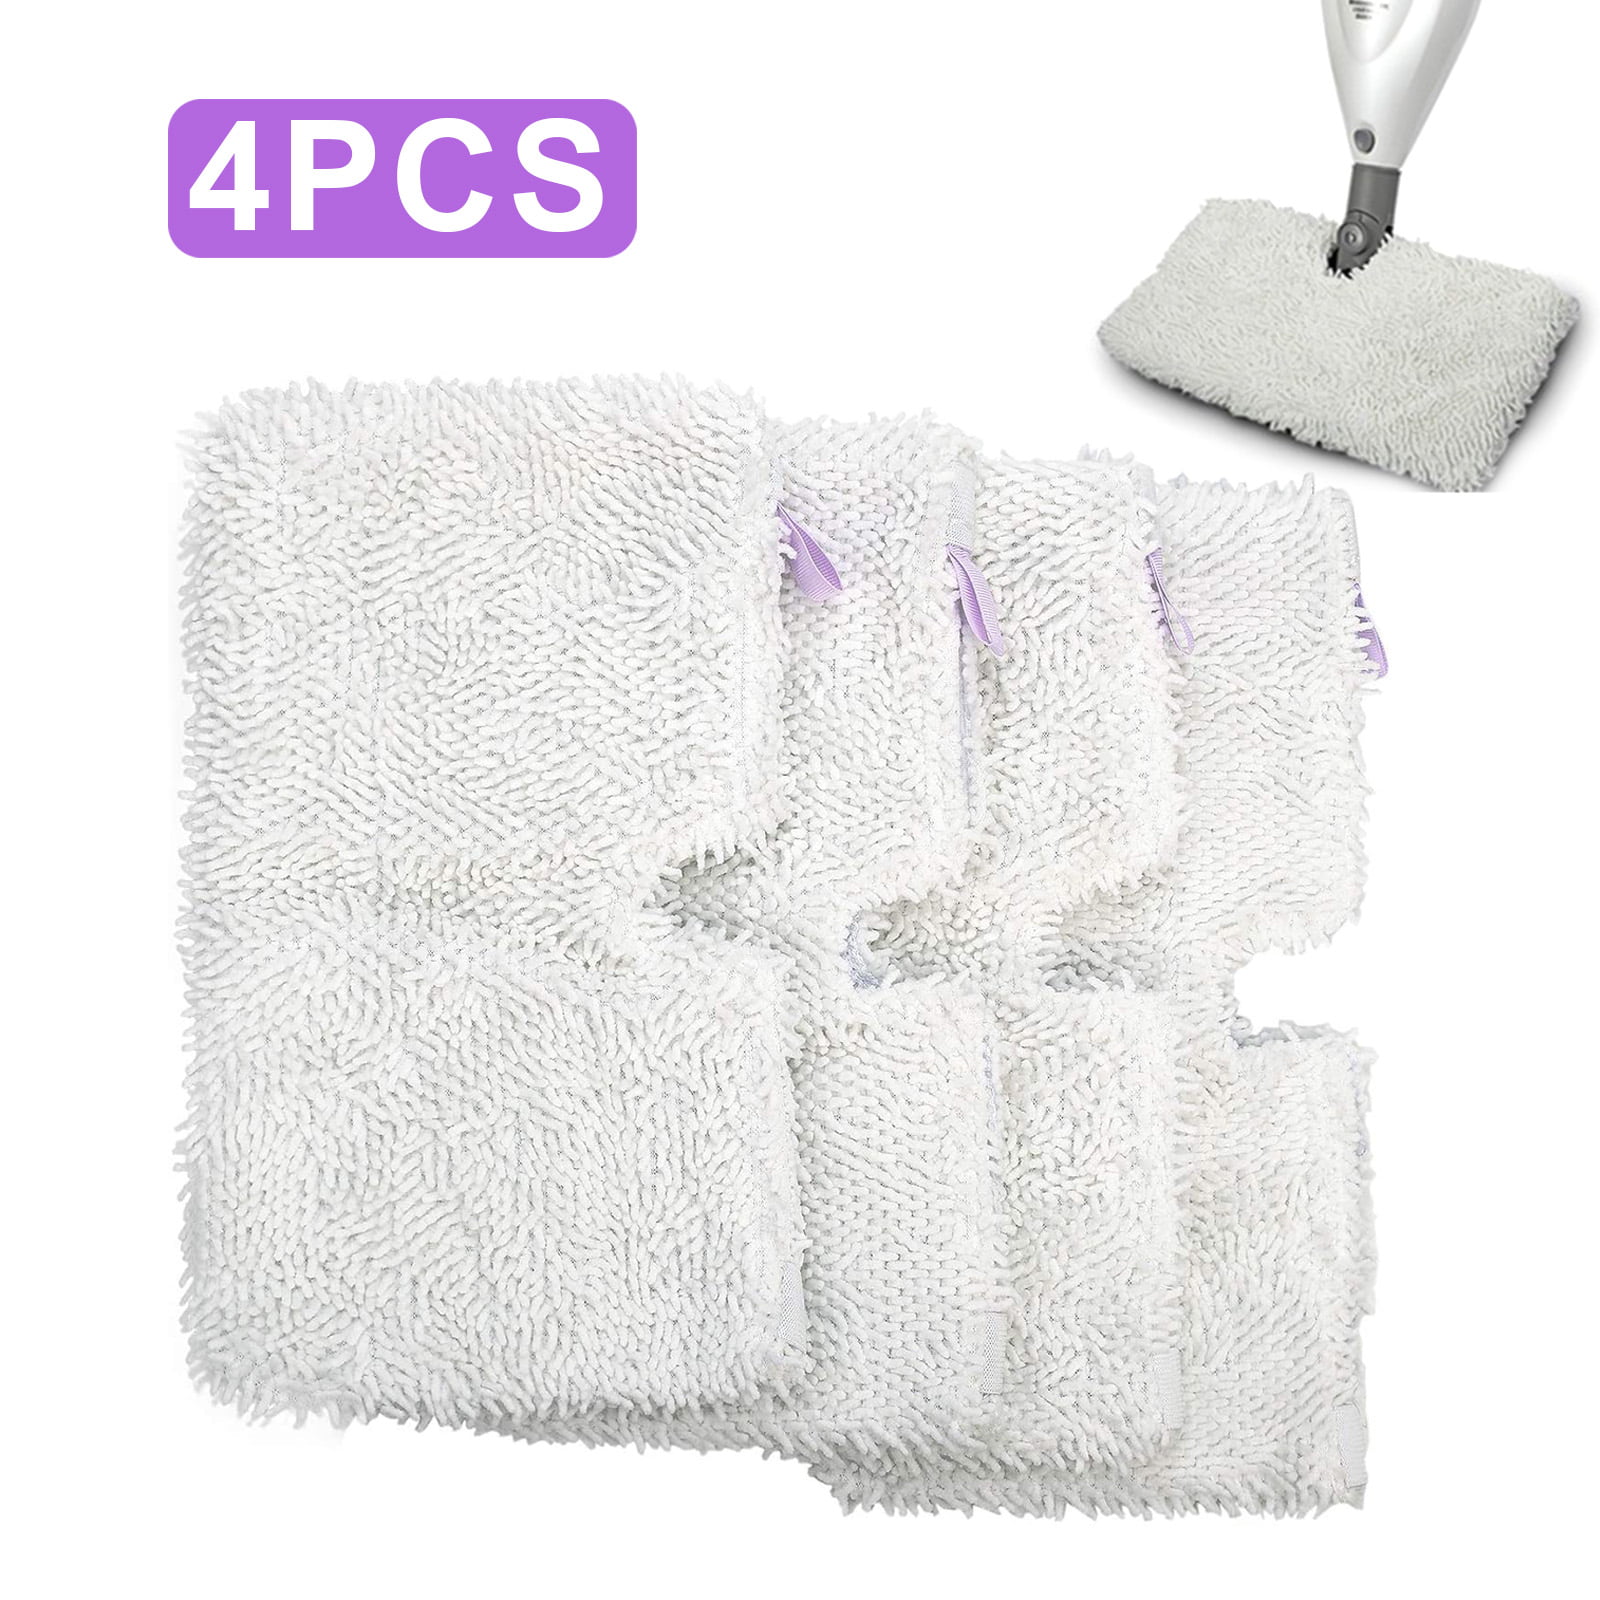 6 x ASDA Genie GUV-03 Steam Mop Hard Floor Microfibre Cleaning Pads Covers 